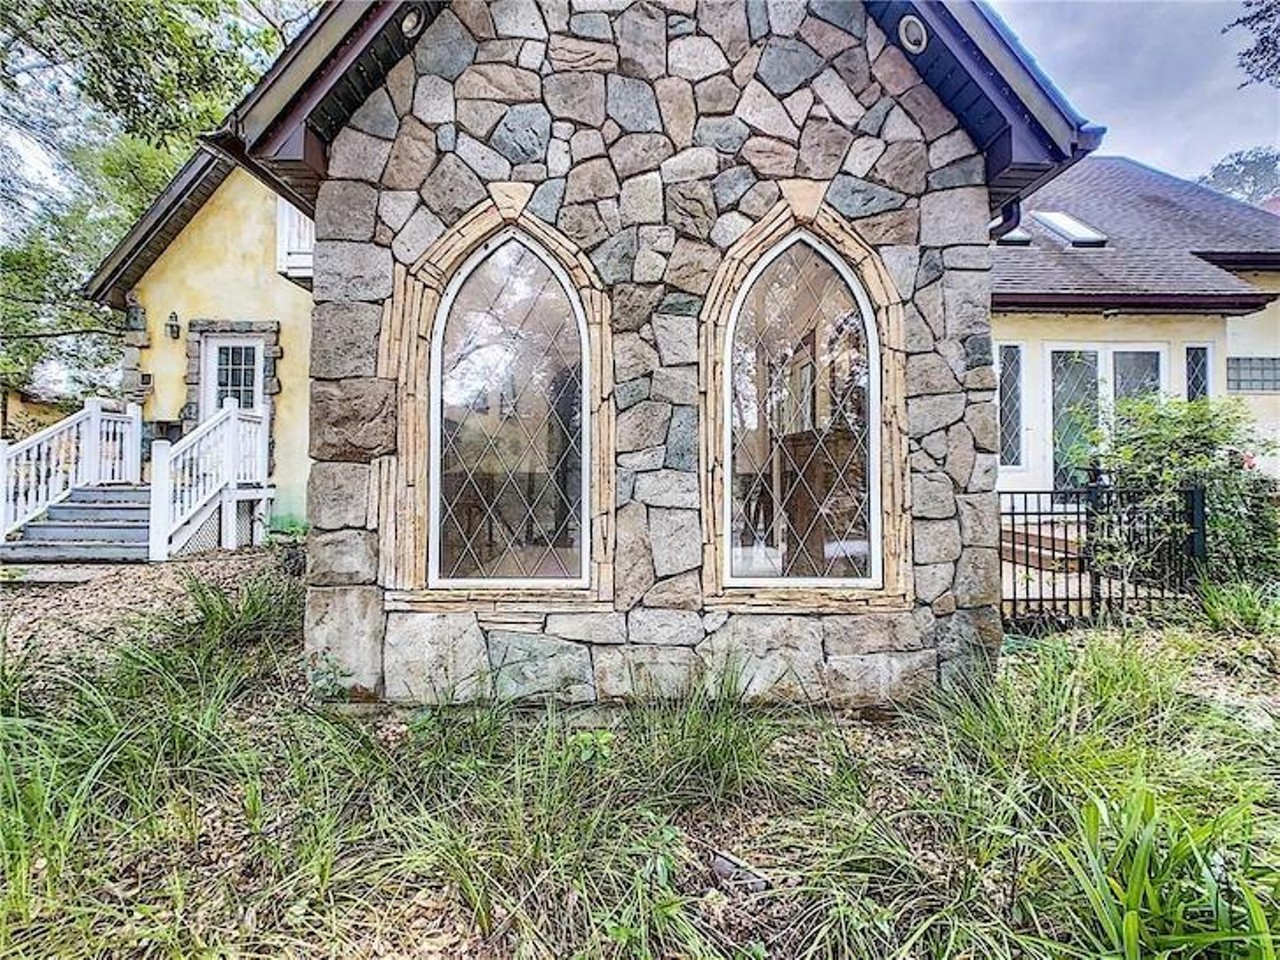 Rick Silanskas once tried to take on Disney World, now his crumbling fairy tale Florida home is for sale